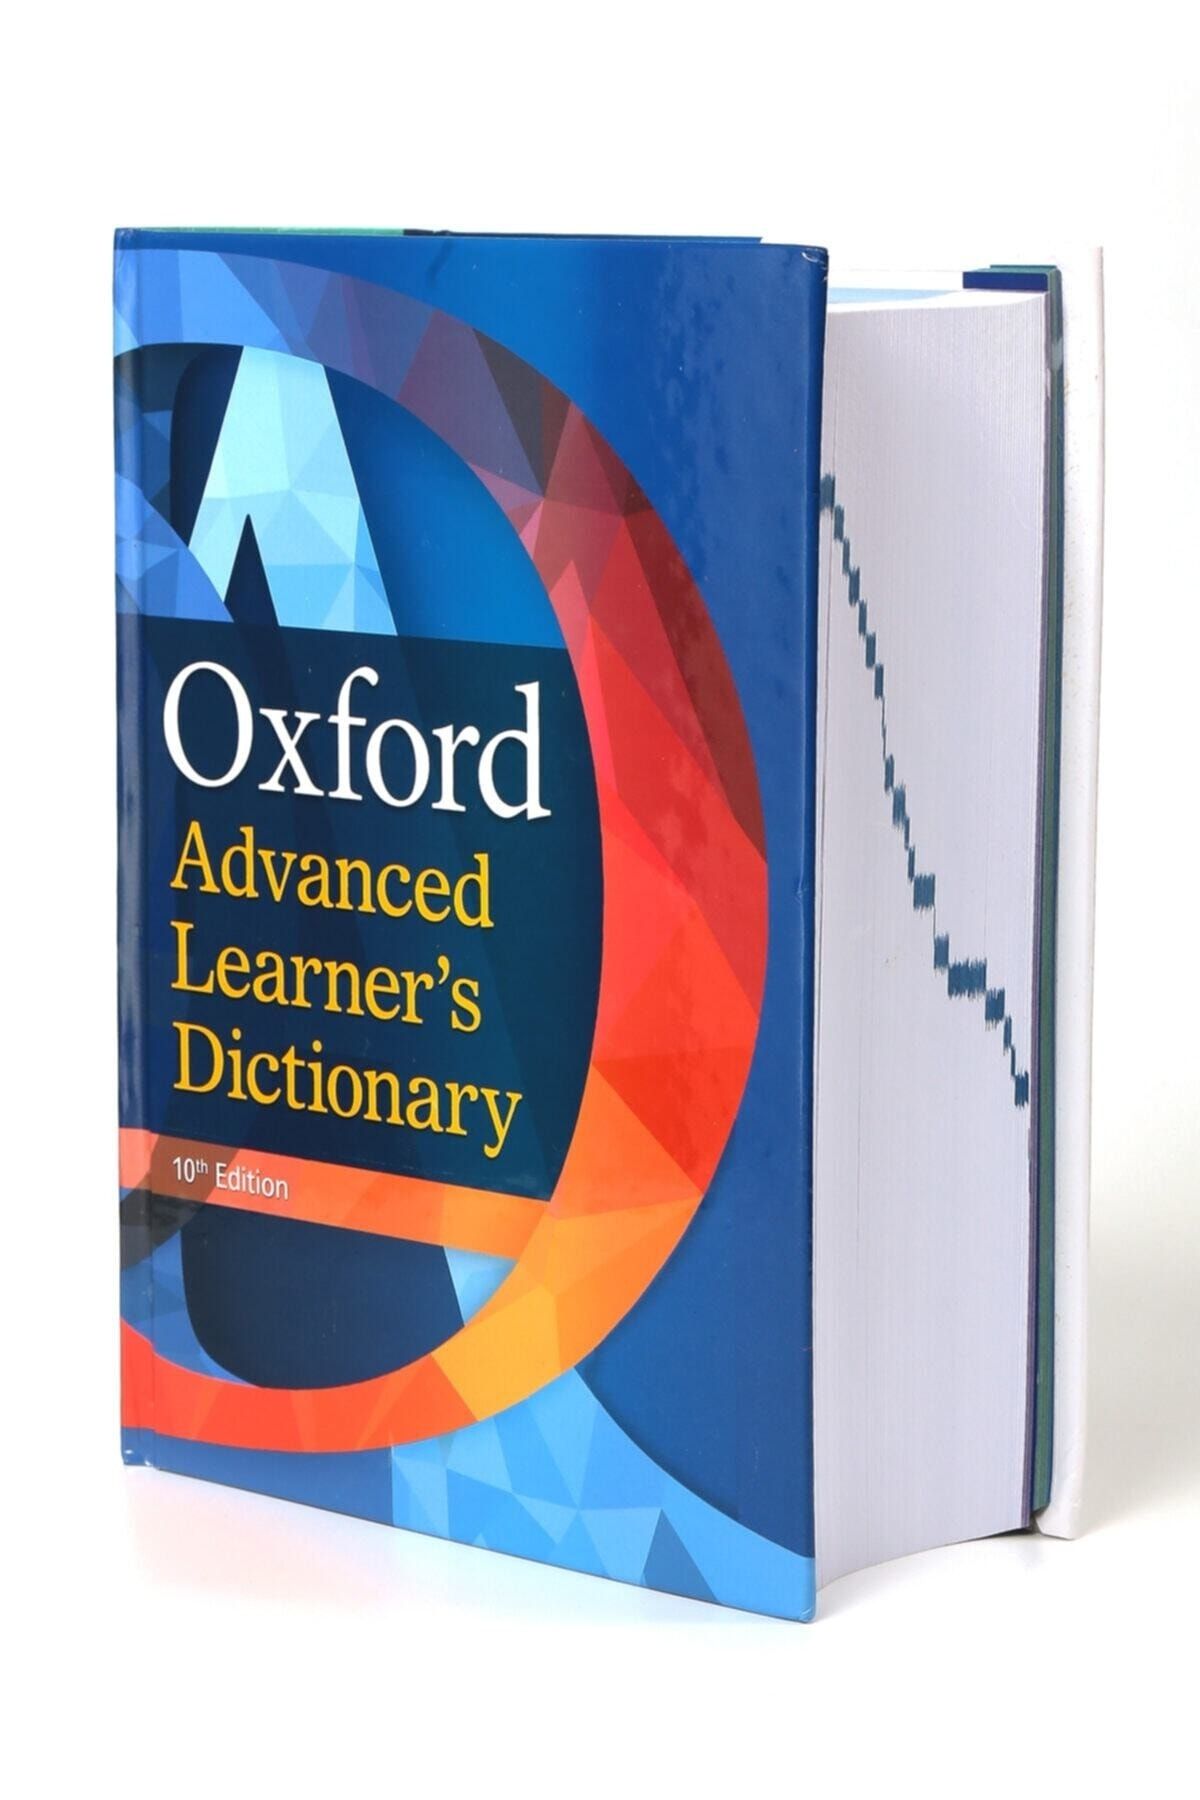 Advanced learner s dictionary. Oxford Advanced Learner's Dictionary. Oxford Advanced Dictionary. Oxford Advanced Learner's. Oxford Dictionary for Advanced Learners.